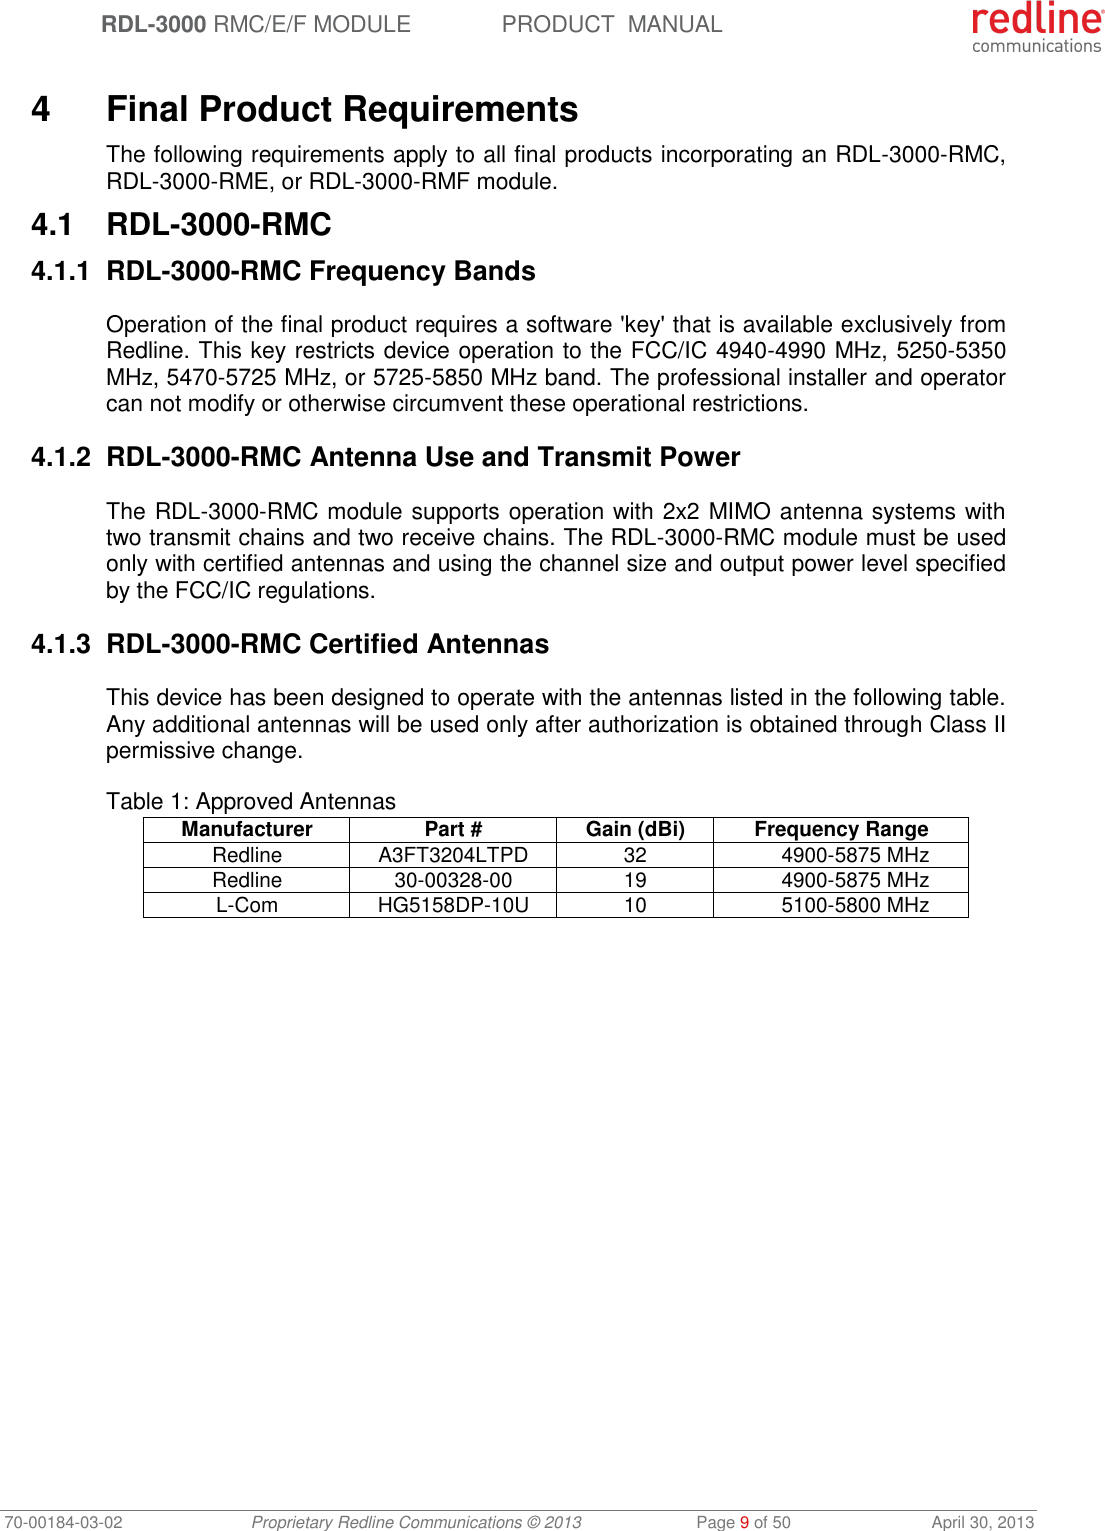  RDL-3000 RMC/E/F MODULE PRODUCT  MANUAL 70-00184-03-02 Proprietary Redline Communications © 2013  Page 9 of 50  April 30, 2013  4  Final Product Requirements The following requirements apply to all final products incorporating an RDL-3000-RMC, RDL-3000-RME, or RDL-3000-RMF module. 4.1  RDL-3000-RMC 4.1.1 RDL-3000-RMC Frequency Bands Operation of the final product requires a software &apos;key&apos; that is available exclusively from Redline. This key restricts device operation to the FCC/IC 4940-4990 MHz, 5250-5350 MHz, 5470-5725 MHz, or 5725-5850 MHz band. The professional installer and operator can not modify or otherwise circumvent these operational restrictions. 4.1.2 RDL-3000-RMC Antenna Use and Transmit Power The RDL-3000-RMC module supports operation with 2x2 MIMO antenna systems with two transmit chains and two receive chains. The RDL-3000-RMC module must be used only with certified antennas and using the channel size and output power level specified by the FCC/IC regulations. 4.1.3 RDL-3000-RMC Certified Antennas This device has been designed to operate with the antennas listed in the following table. Any additional antennas will be used only after authorization is obtained through Class II permissive change. Table 1: Approved Antennas Manufacturer Part # Gain (dBi) Frequency Range Redline A3FT3204LTPD 32 4900-5875 MHz Redline 30-00328-00 19 4900-5875 MHz L-Com HG5158DP-10U 10 5100-5800 MHz  